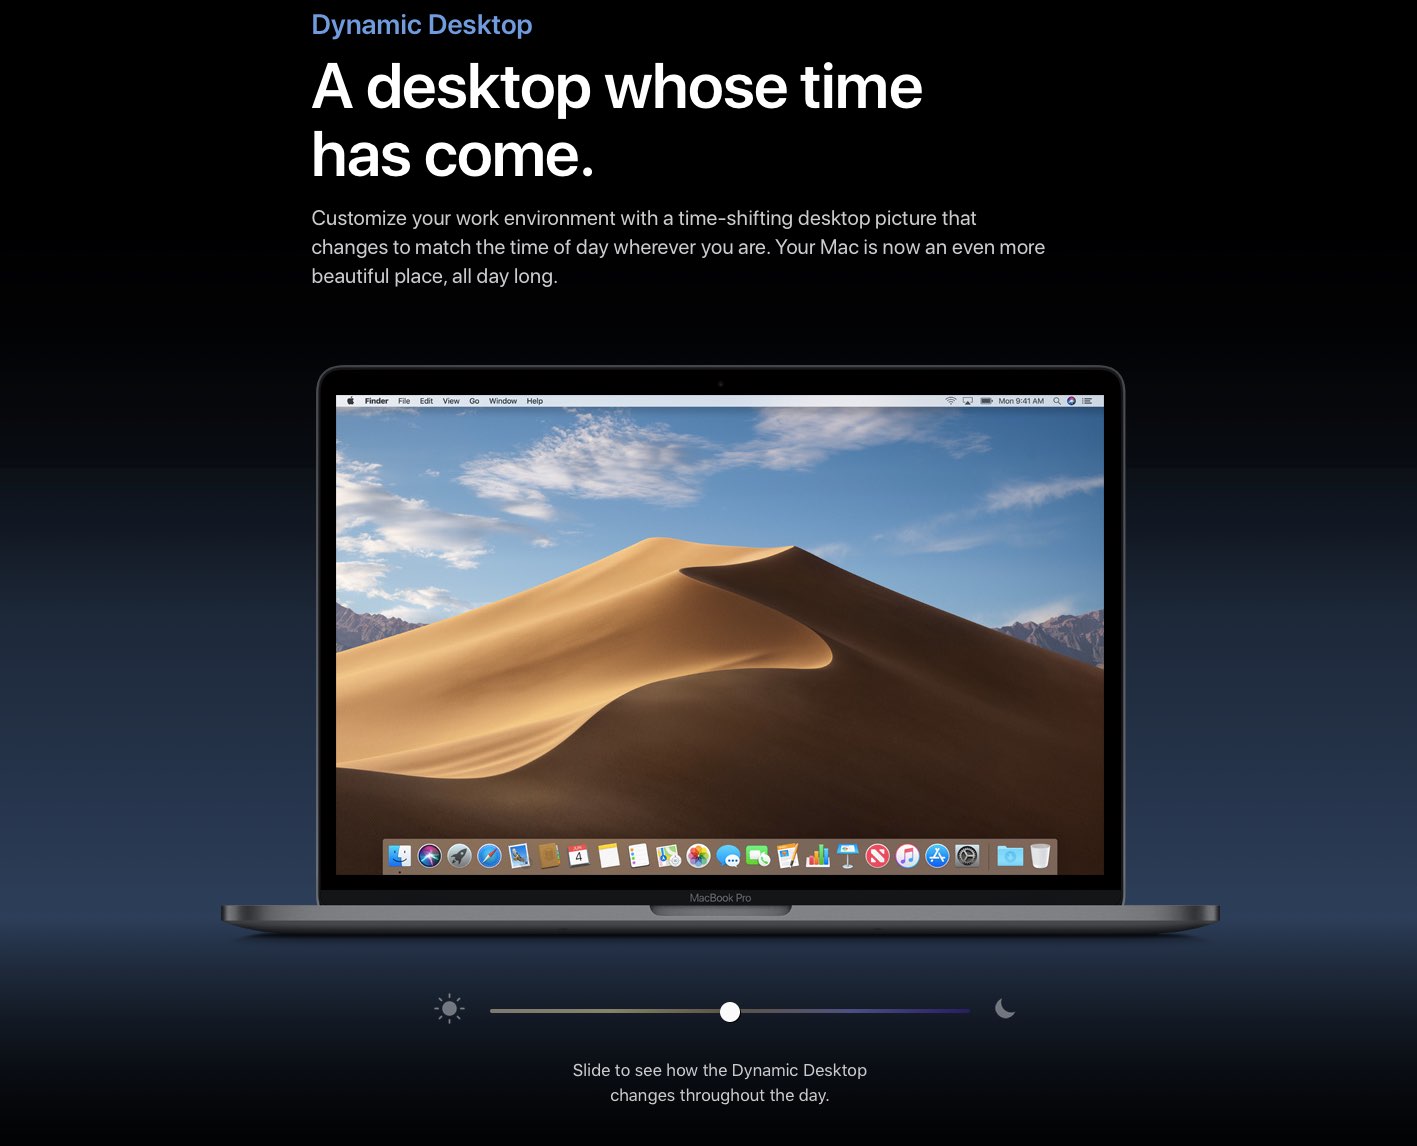 macOS Mojave sports a time shifting wallpaper that changes through